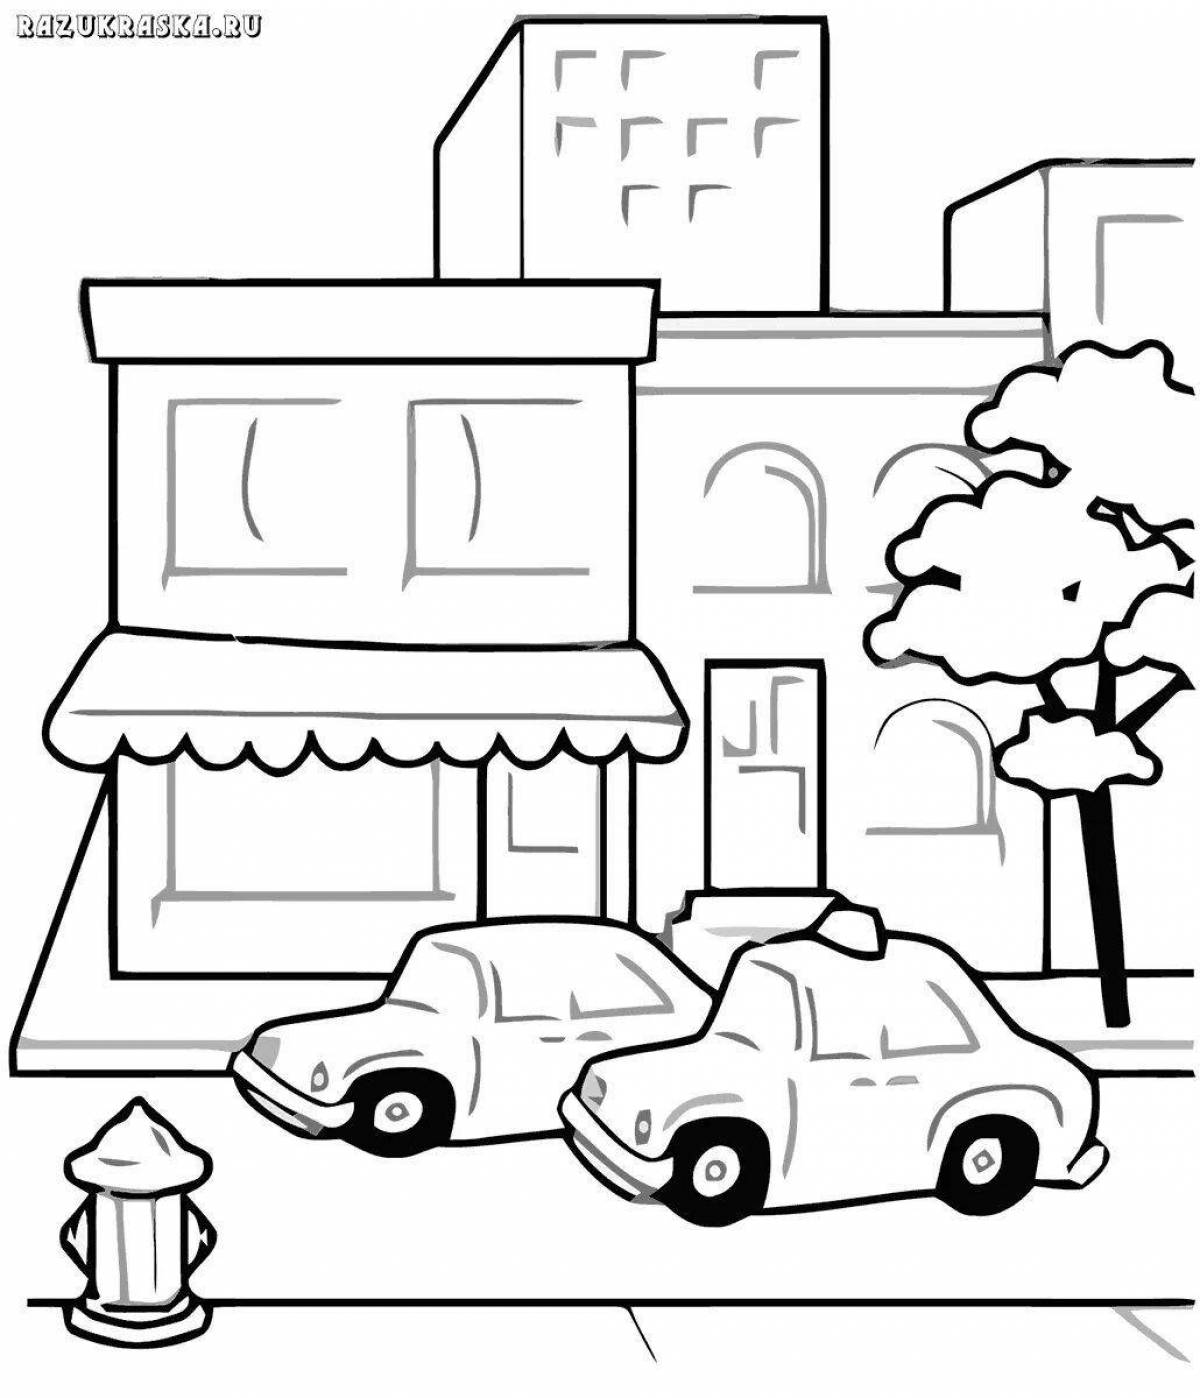 Coloring page nice street cars